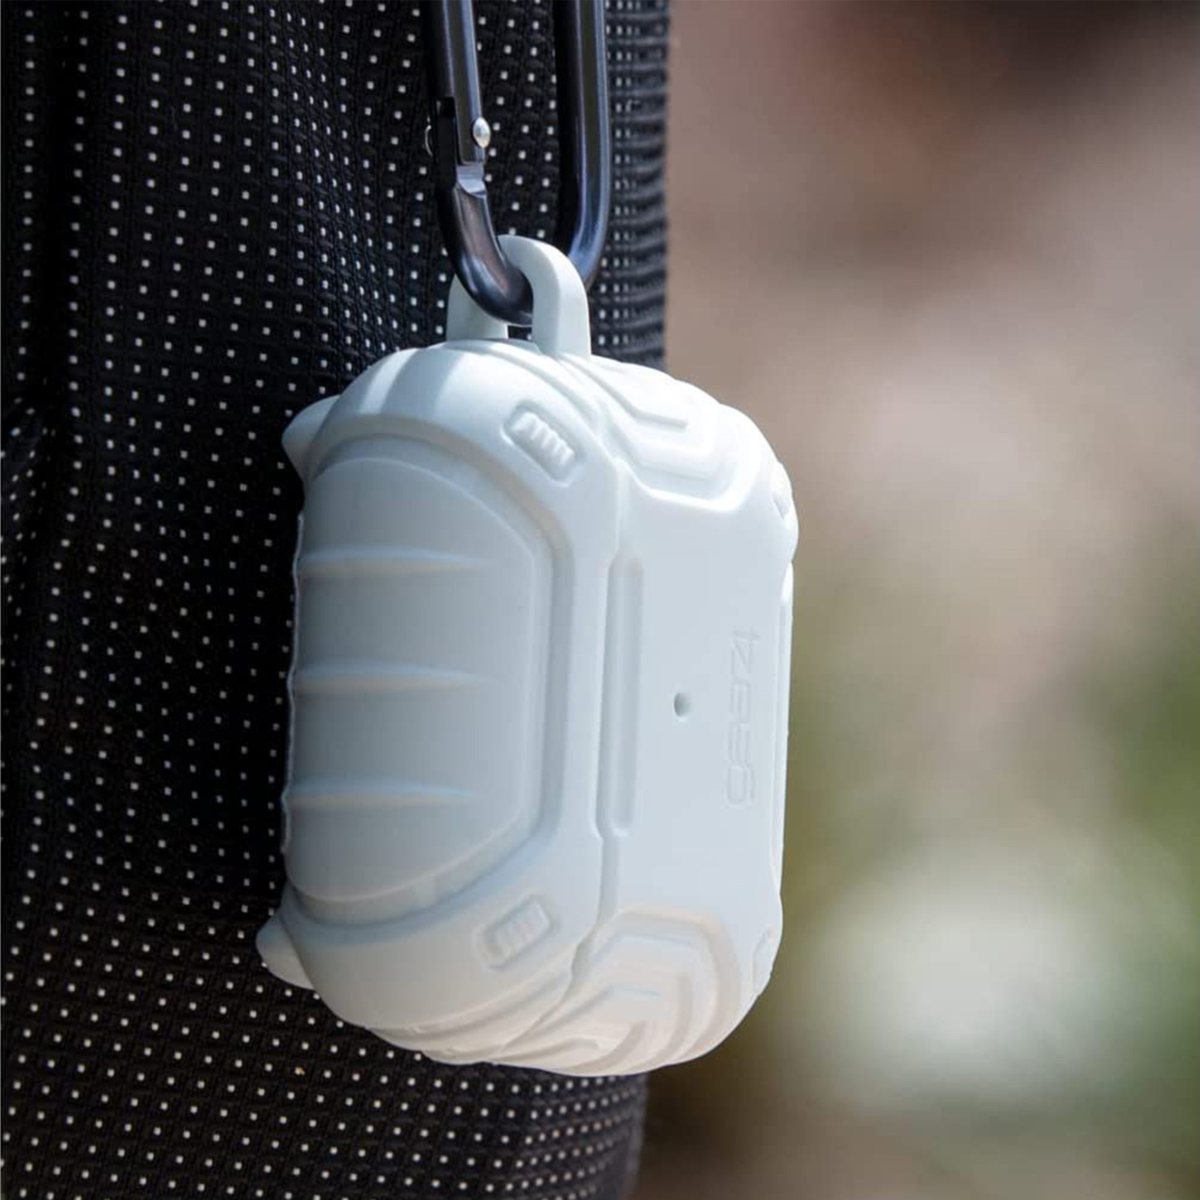 Guarantee your AirPods are safe and always close-at-hand with the Gear4 Apollo Snap Case, providing 360° protection.